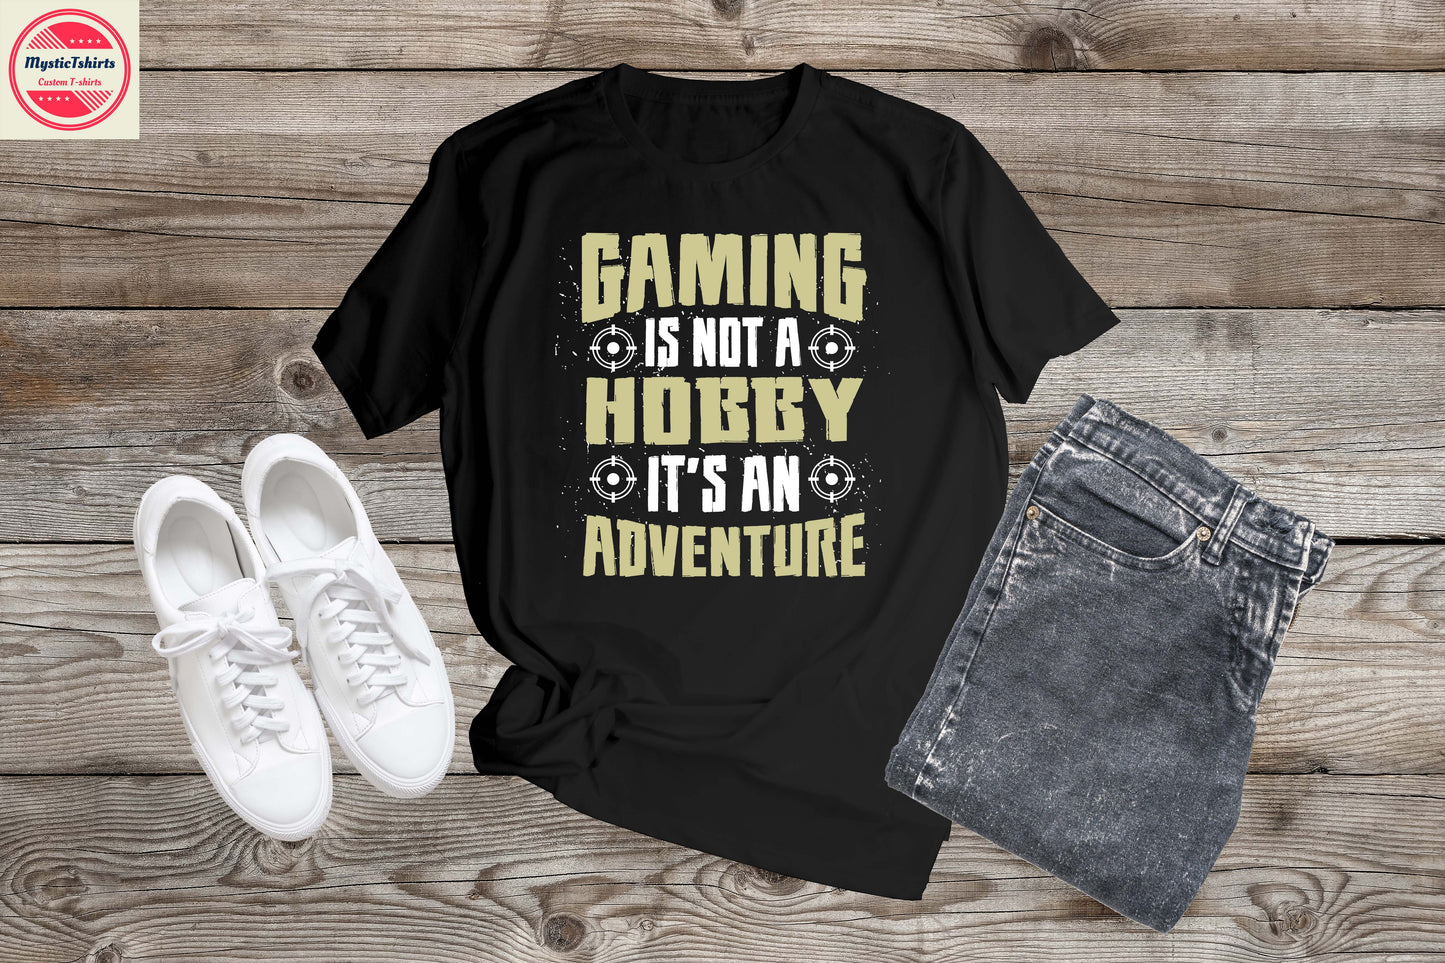 172. GAMING IS NOT A HOBBY IT'S AN ADVENTURE, Custom Made Shirt, Personalized T-Shirt, Custom Text, Make Your Own Shirt, Custom Tee